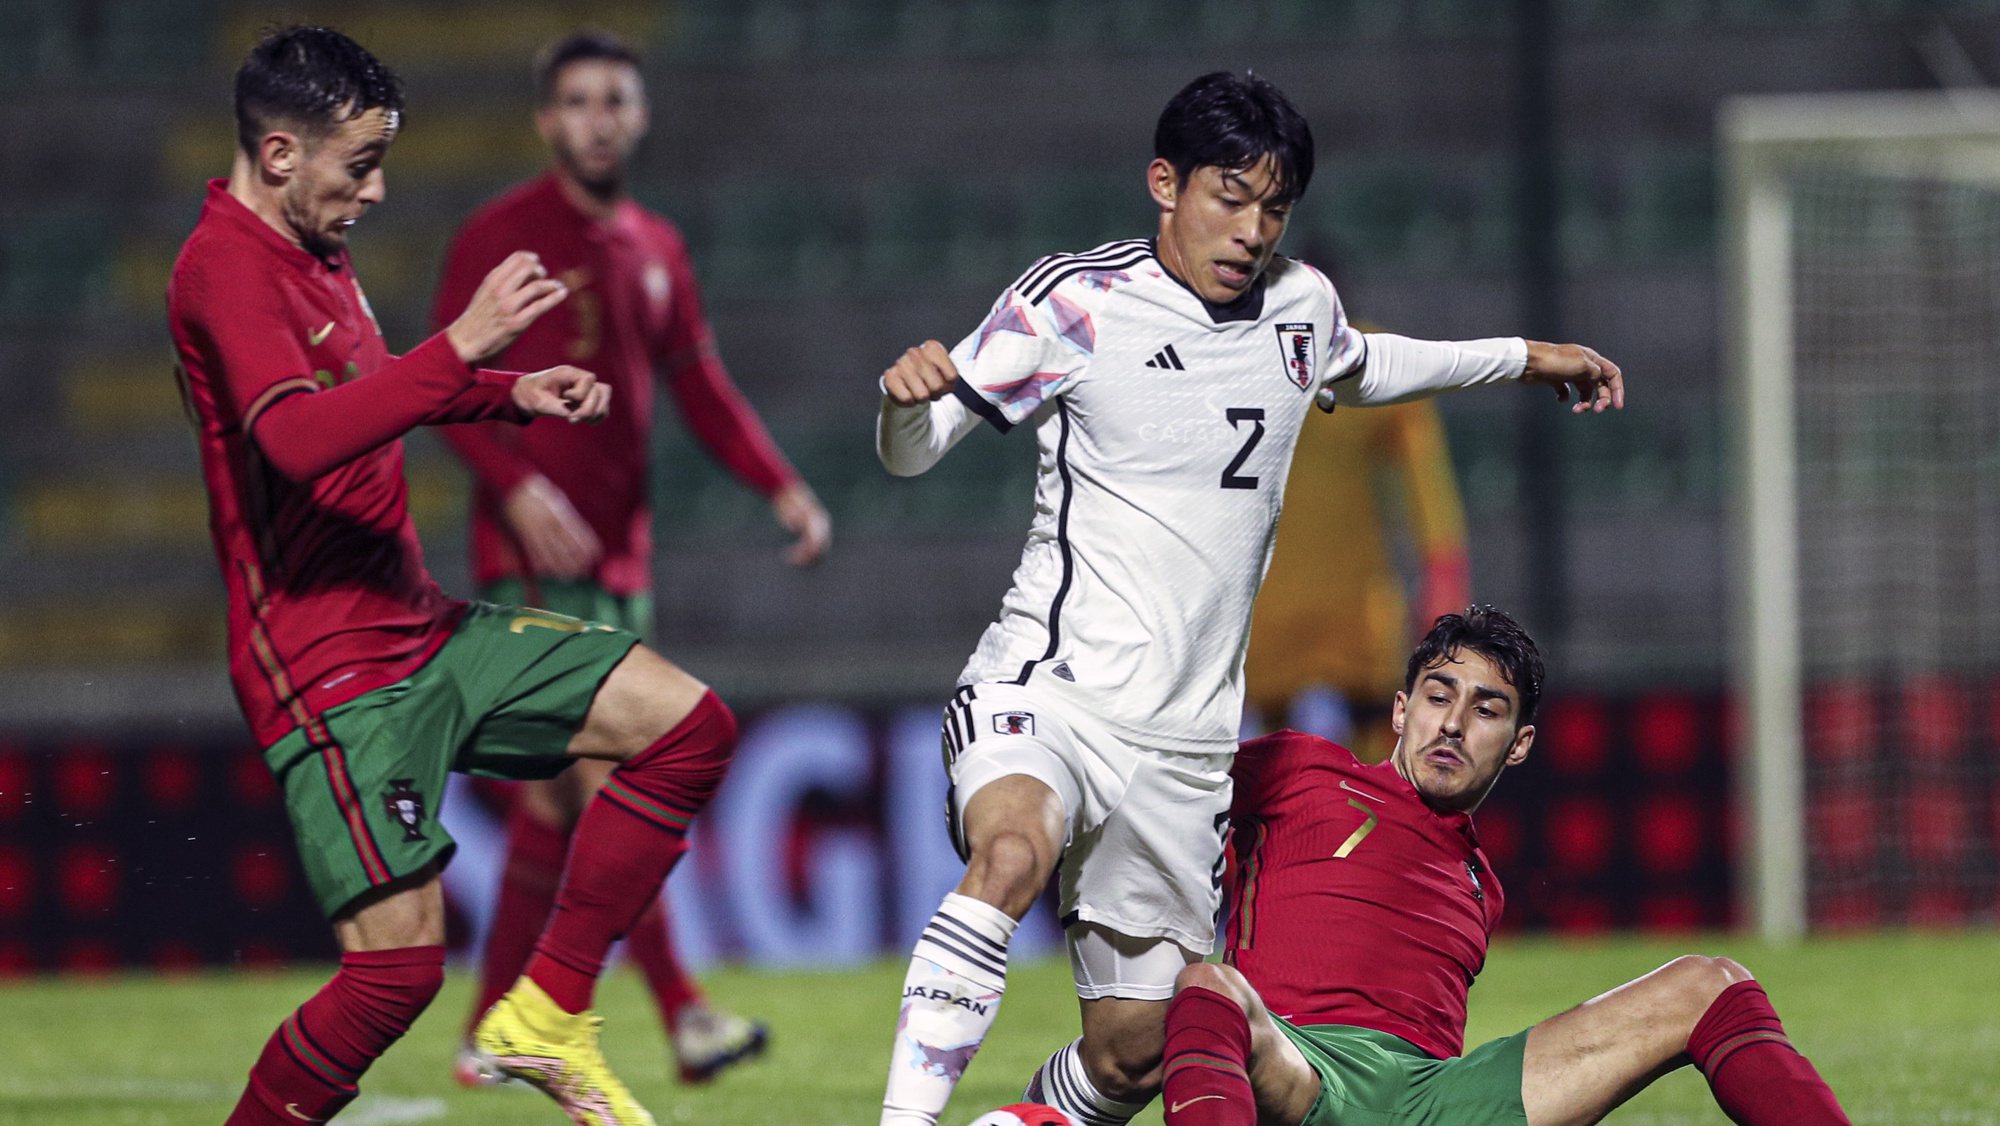 Portugal Under-21 soccer player, Andre Almeida (R), in action against Japan`s Riku Handa during their friendly match in preparation for the final phase of Georgia/Romania 2023 Under-21 European Soccer Championship, held at Portimonense Sytadium, Portimao, Portugal, 22 November 2022. LUIS FORRA/LUSA